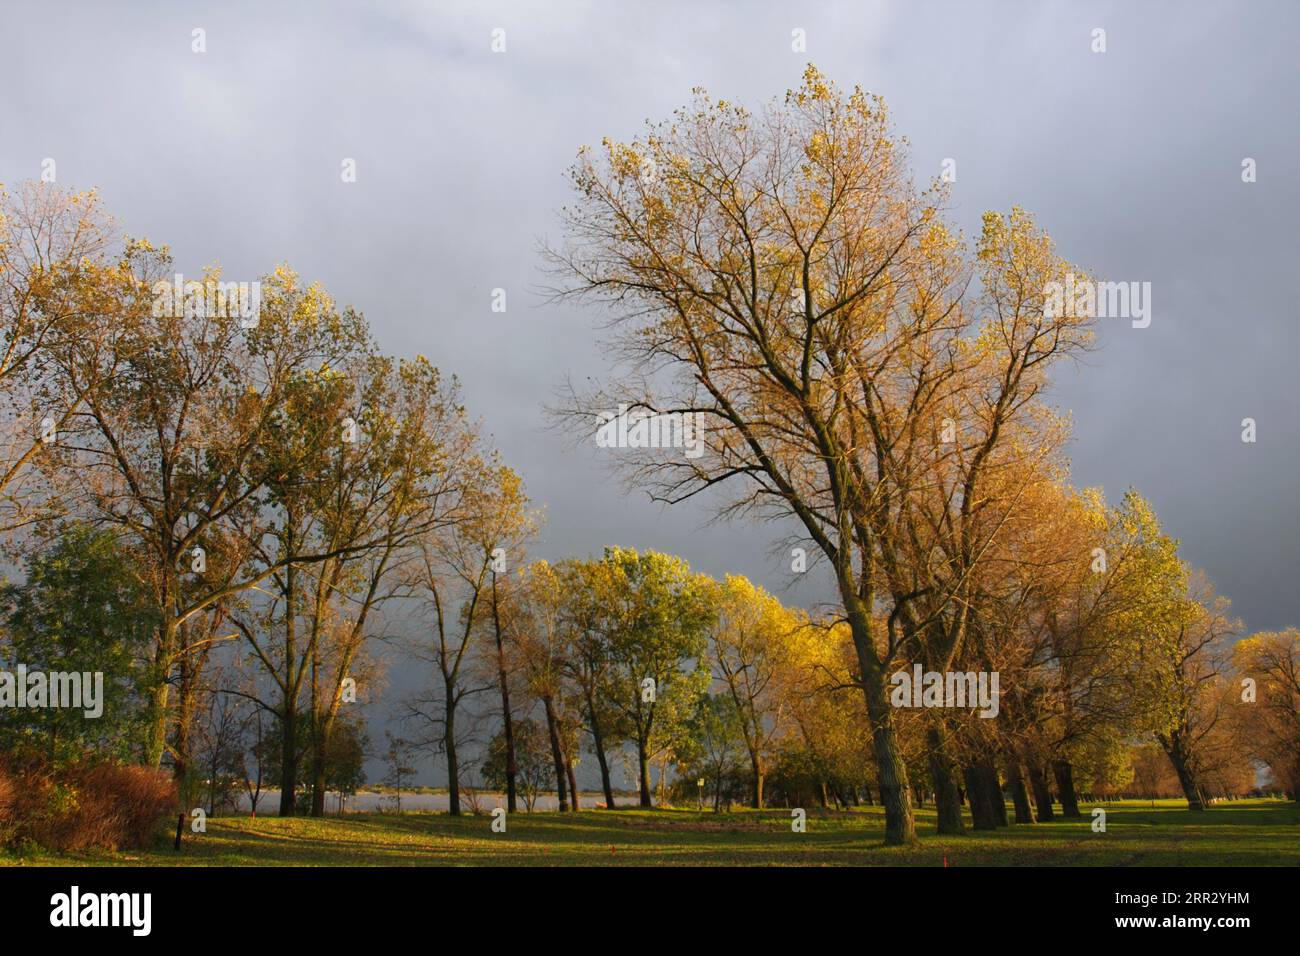 Gallery forest in autumn on the Unterweserinsel Strohauser Plate, Strohauser Plate, Wesermarsch district, Lower Saxony, Germany Stock Photo